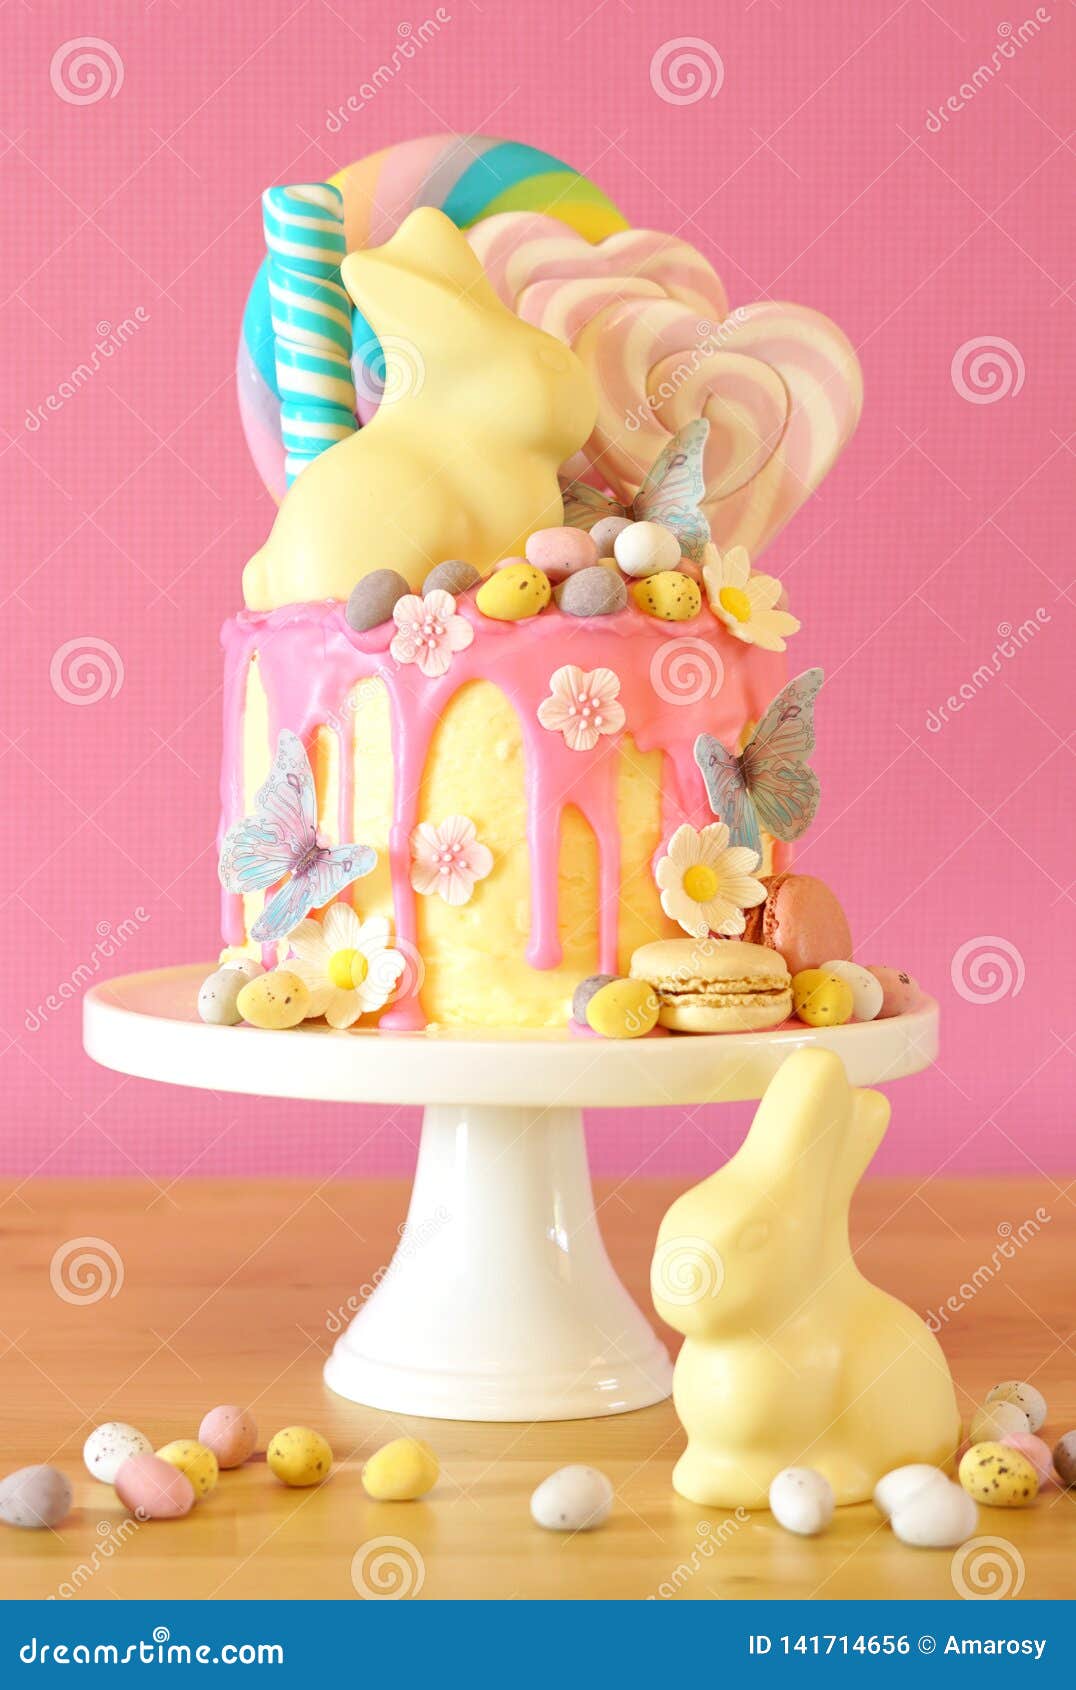 Easter Candy Land Drip Cake Decorated with Lollipops and White Bunny ...